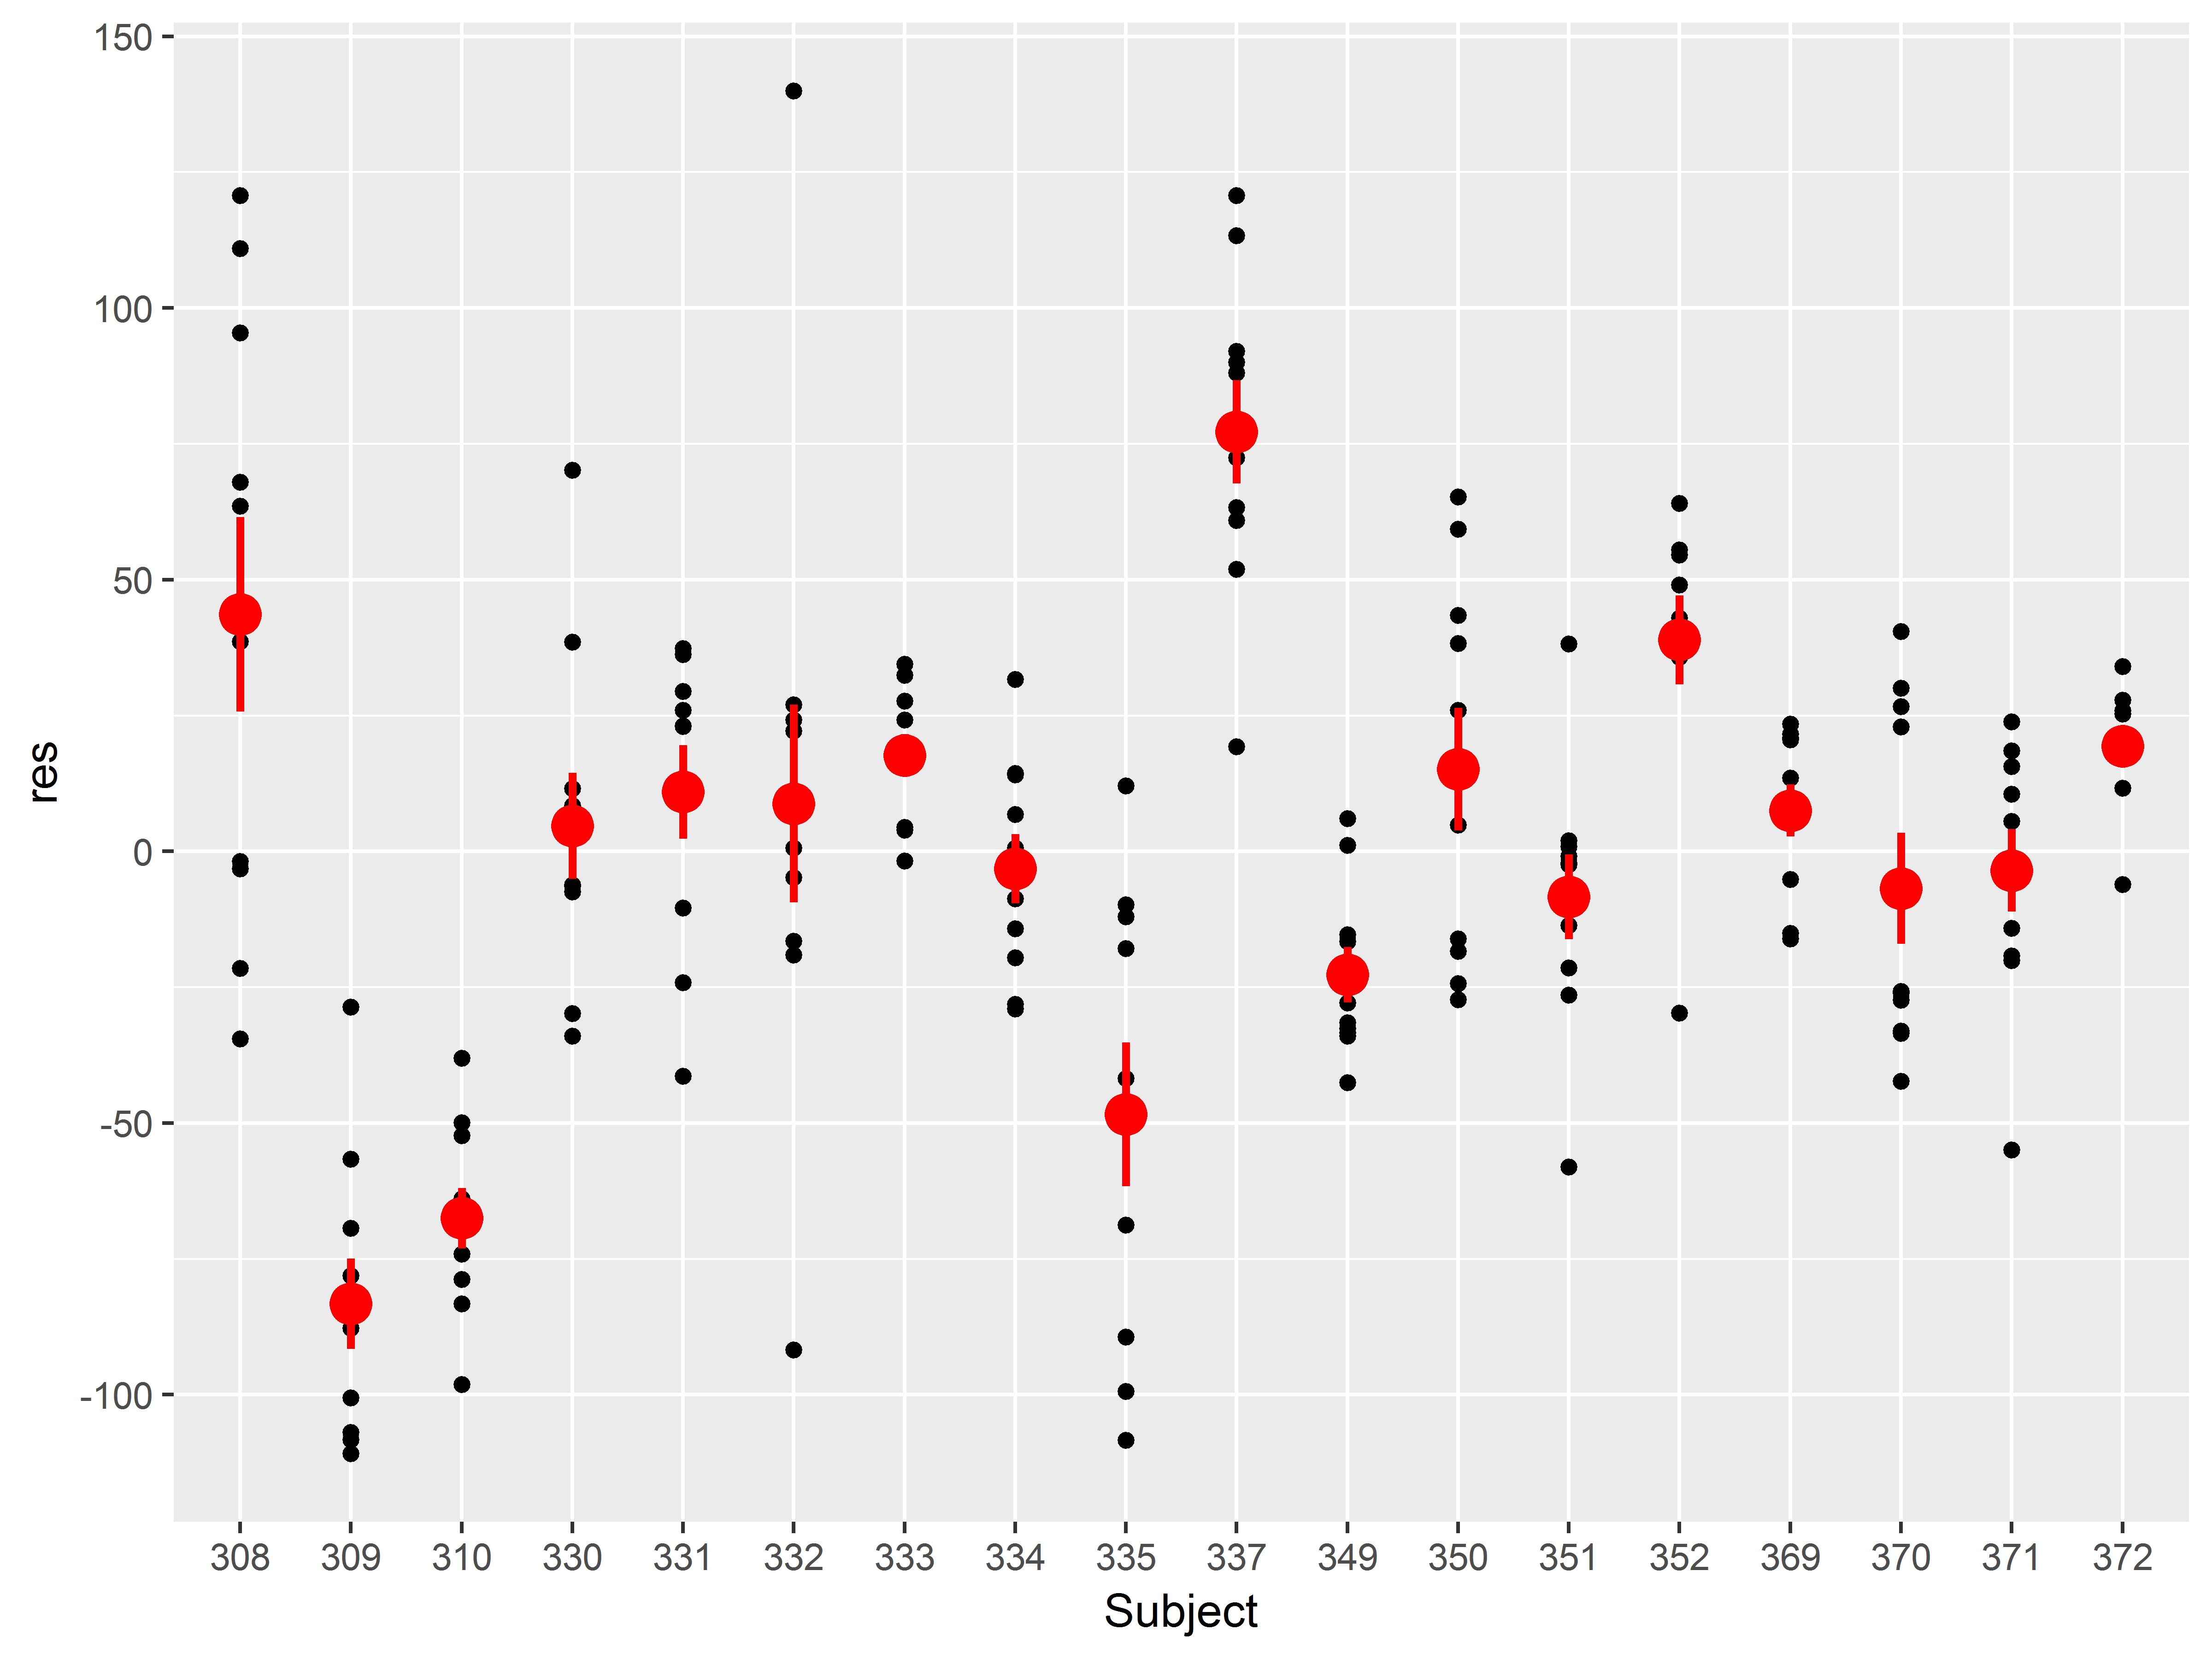 Fig 4.4c residuals by Subject, with big red means and s.e.